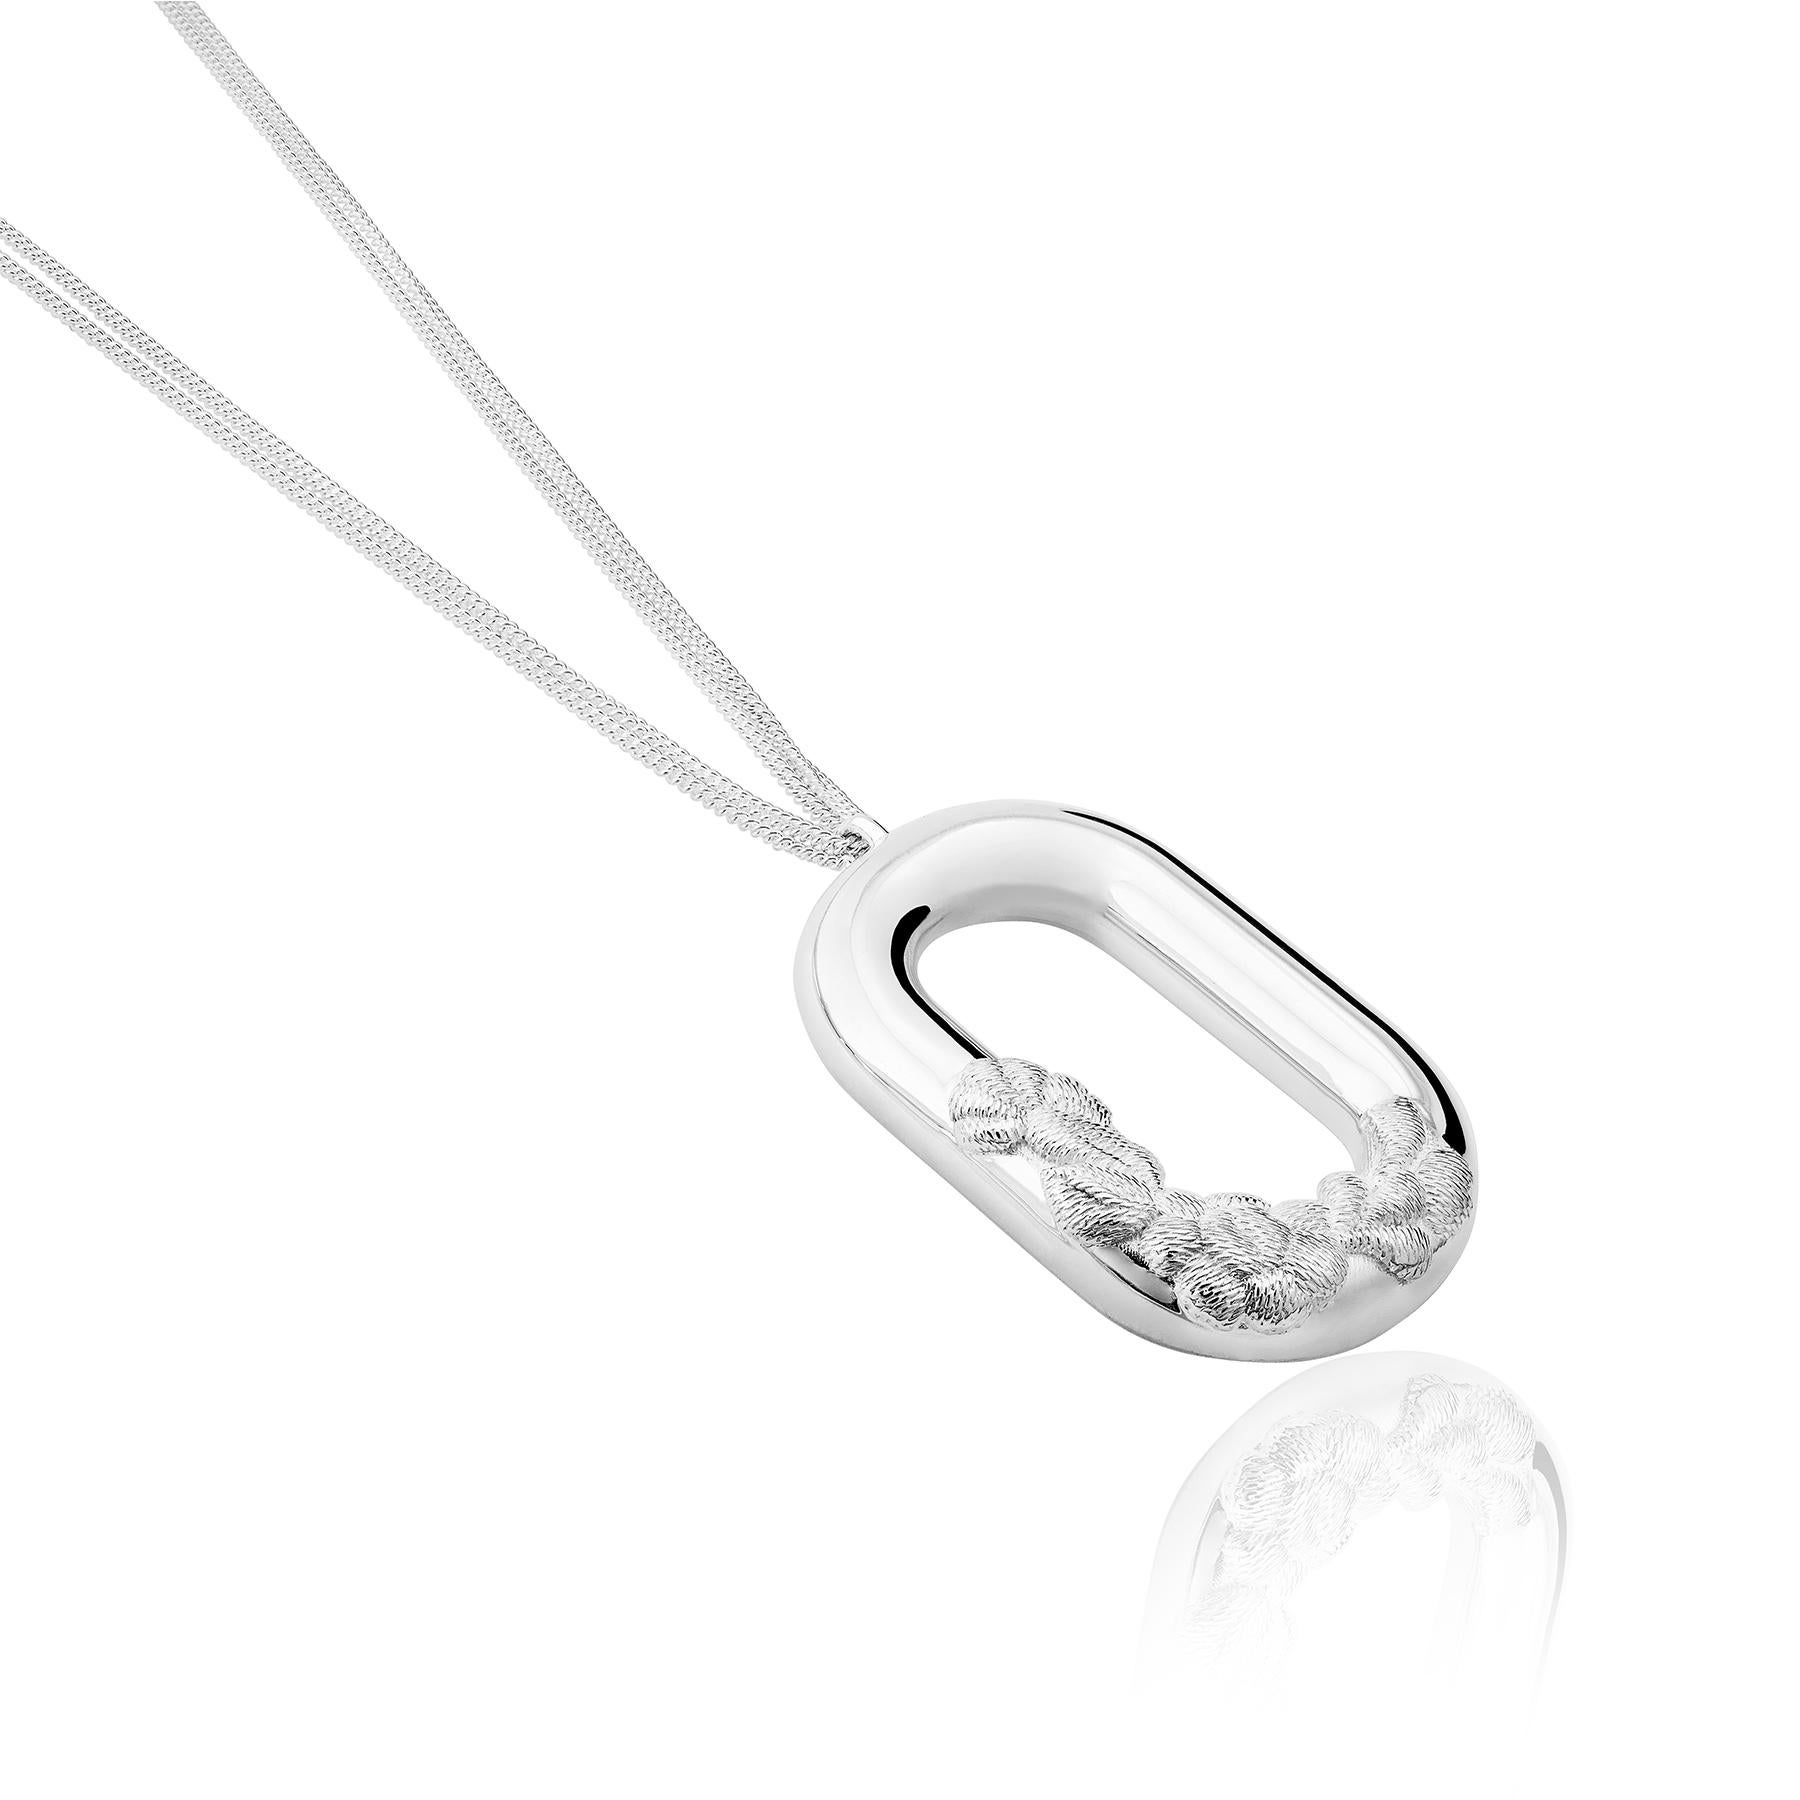 The Bordados Link Pendant from the Bordados Collection by TANE is made in sterling silver. A pendant hangs from a chain of 31.4¨, the symbol of TANE's jewelry trade that supports a floral element which recreates in silver the texture of the thread